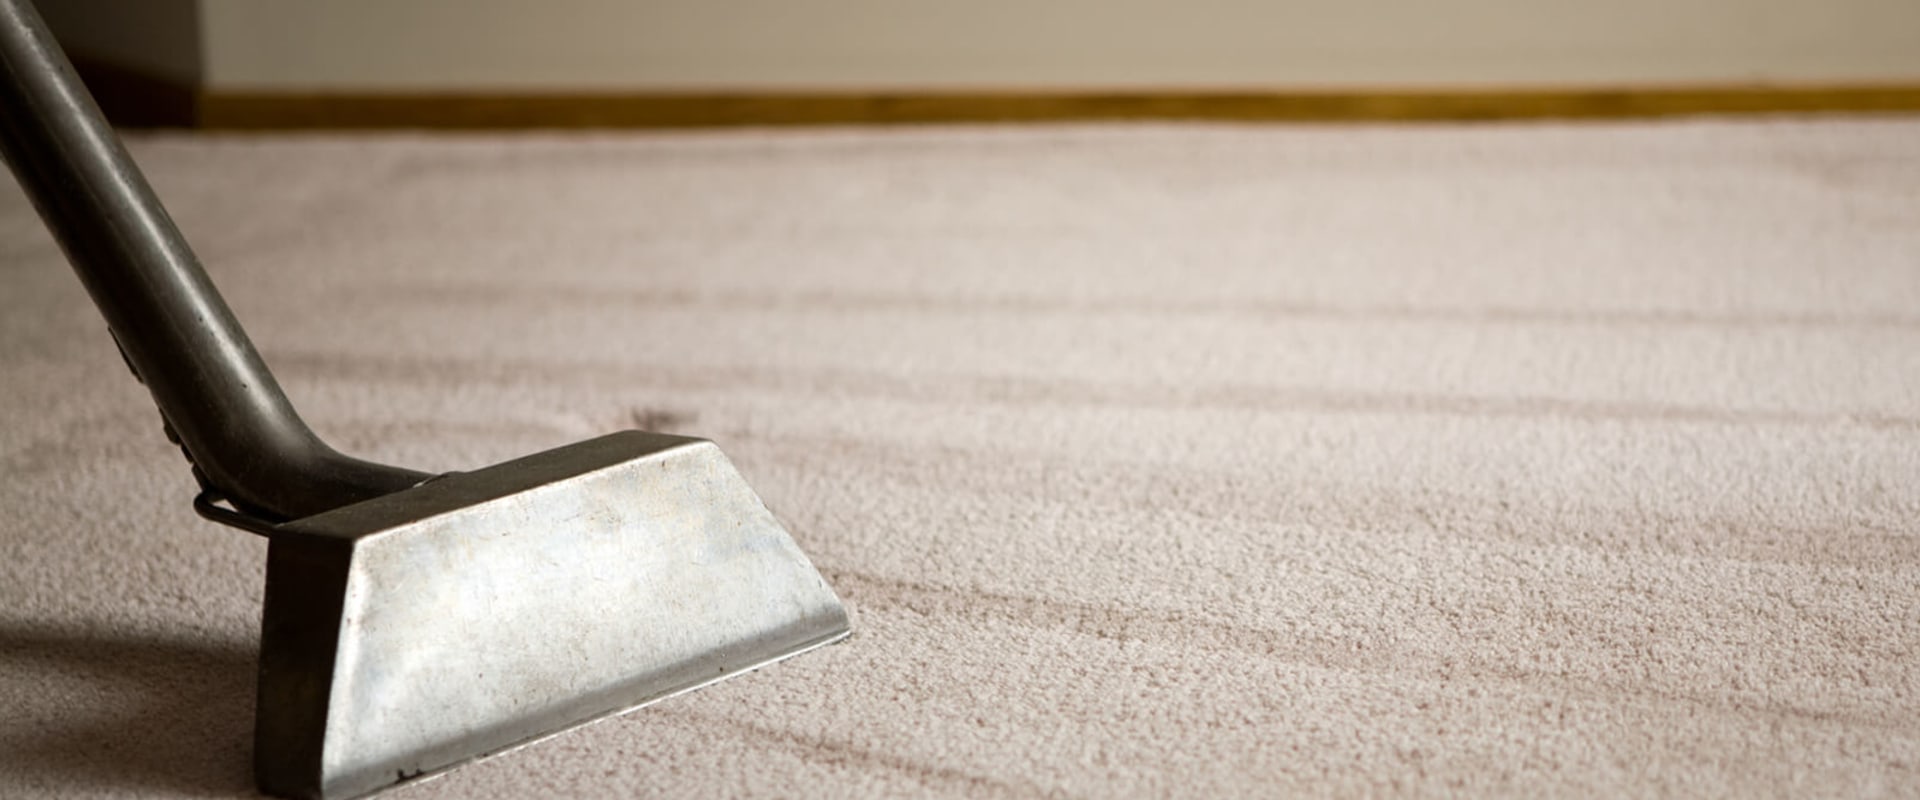 Is it Time for Professional Carpet Cleaning?